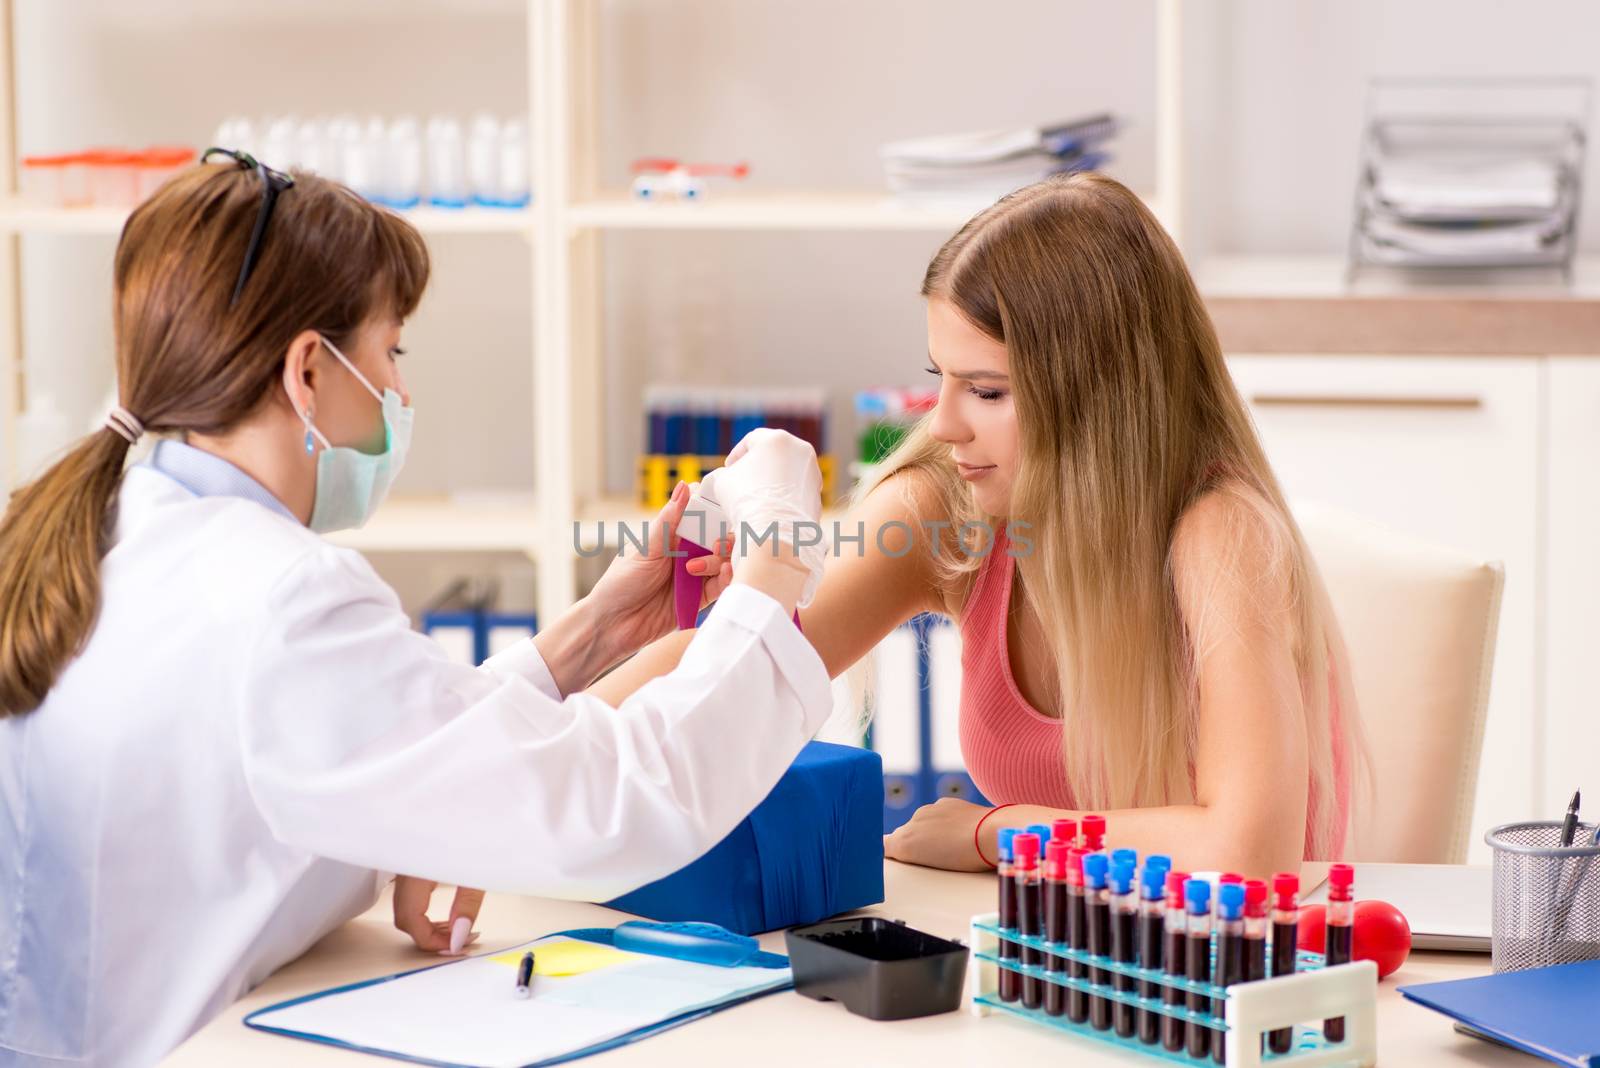 Young beautiful woman during blood test sampling procedure  by Elnur